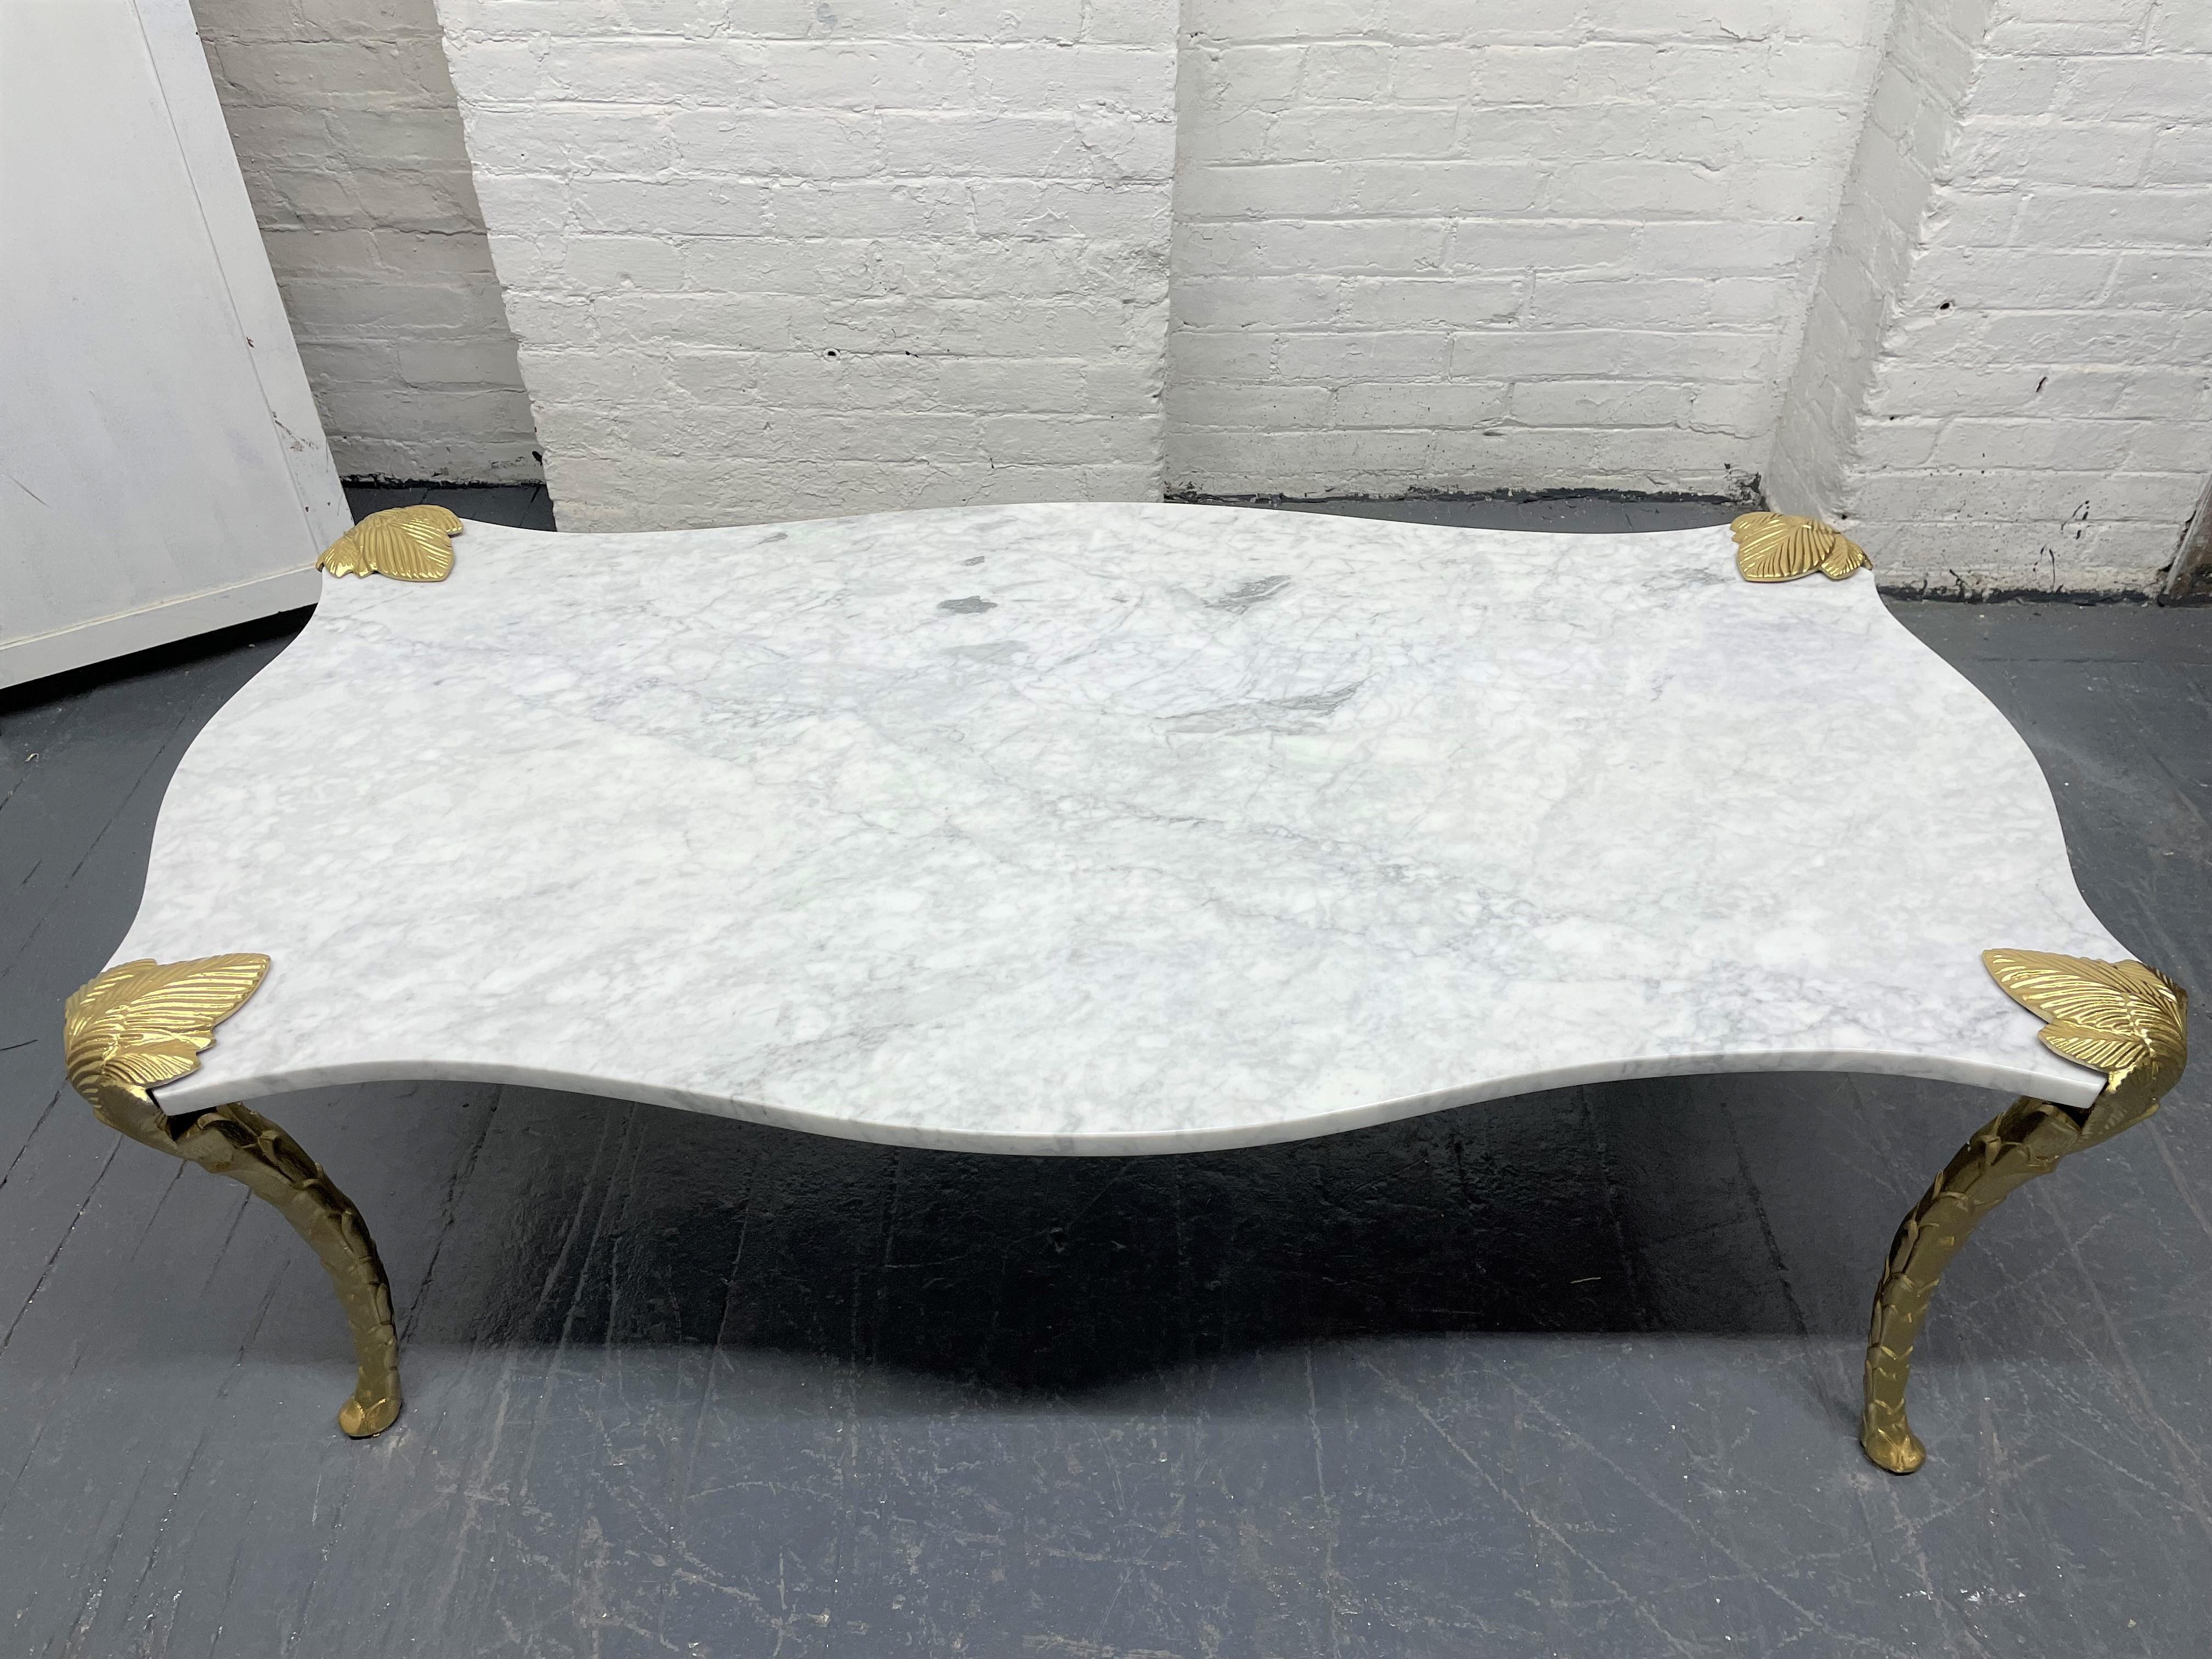 Metal Decorative Carrara Marble Top Coffee Table with Floral Legs For Sale